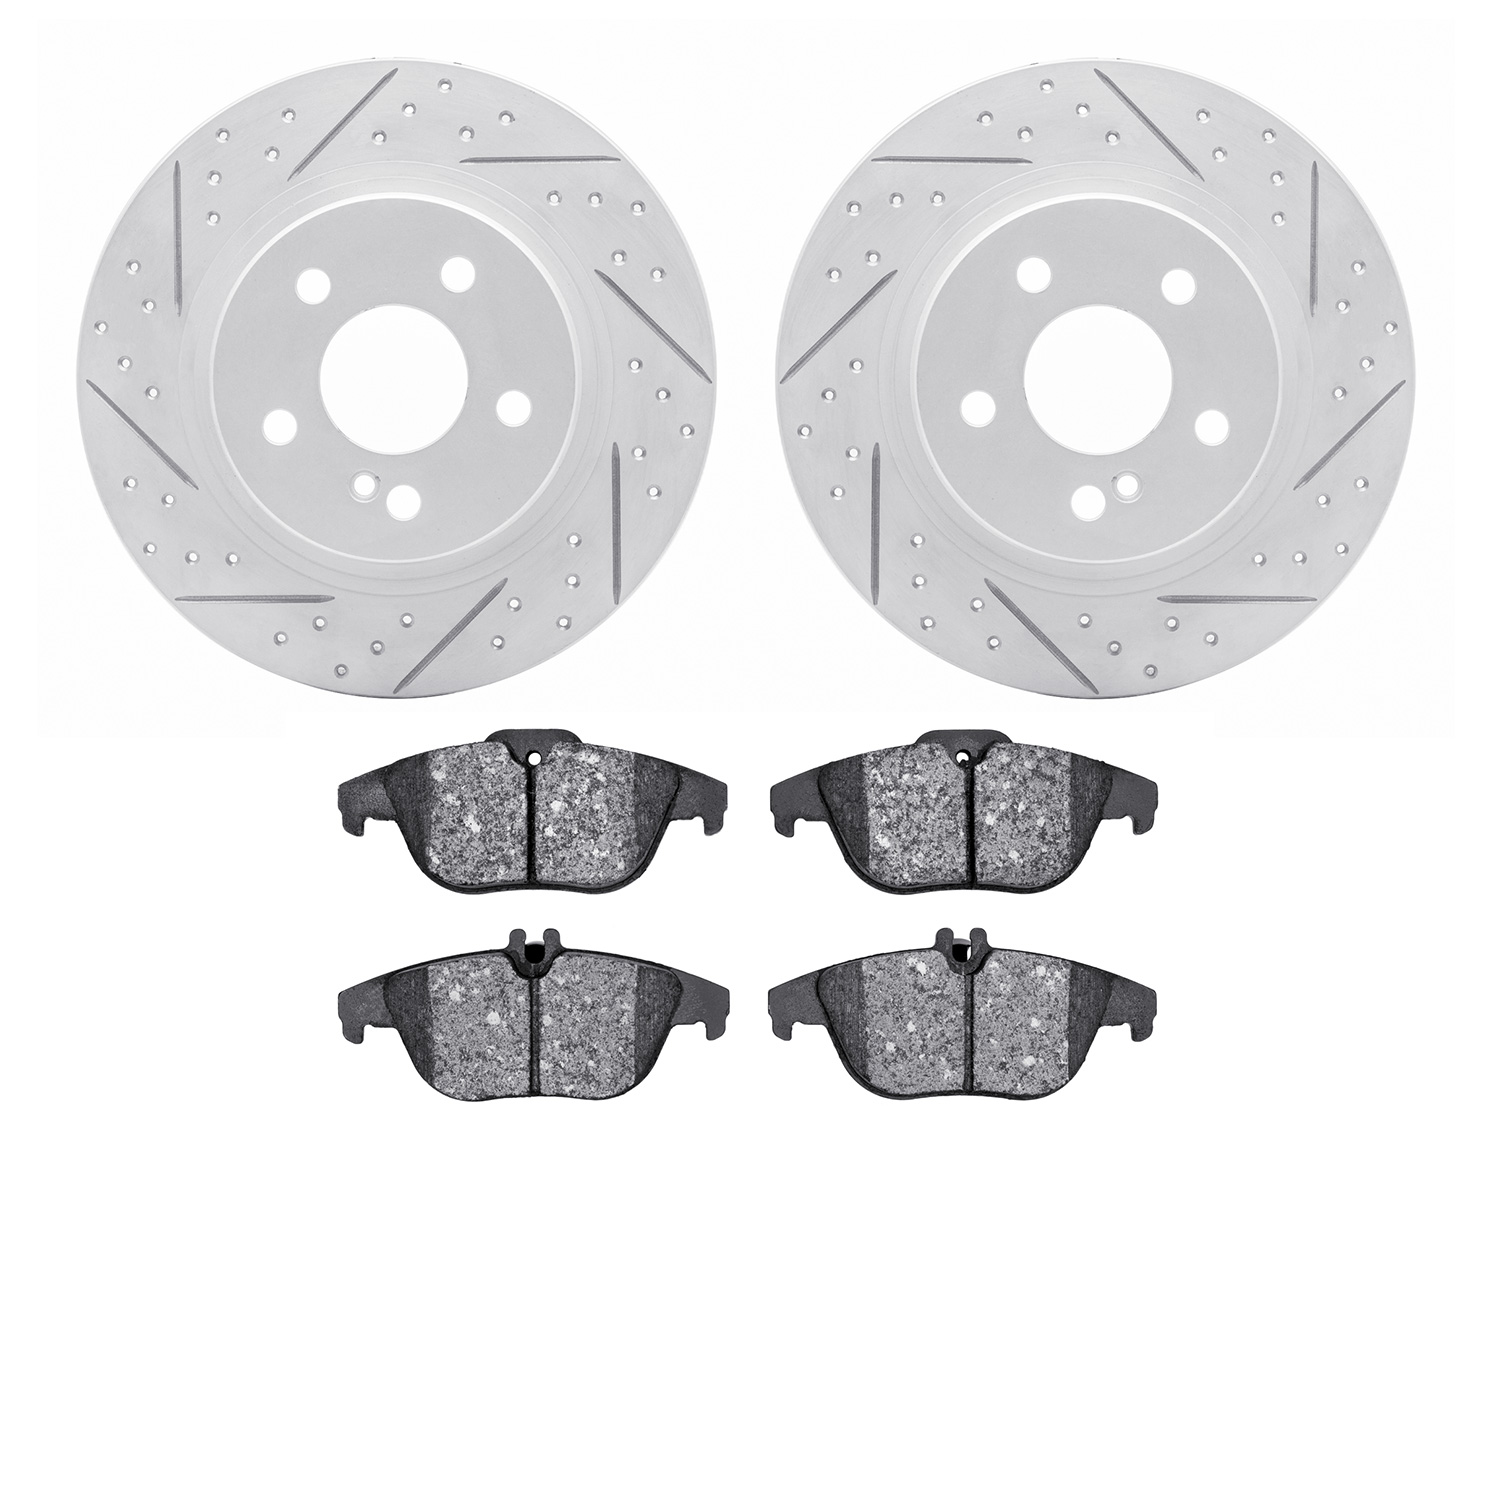 2502-63033 Geoperformance Drilled/Slotted Rotors w/5000 Advanced Brake Pads Kit, 2008-2012 Mercedes-Benz, Position: Rear